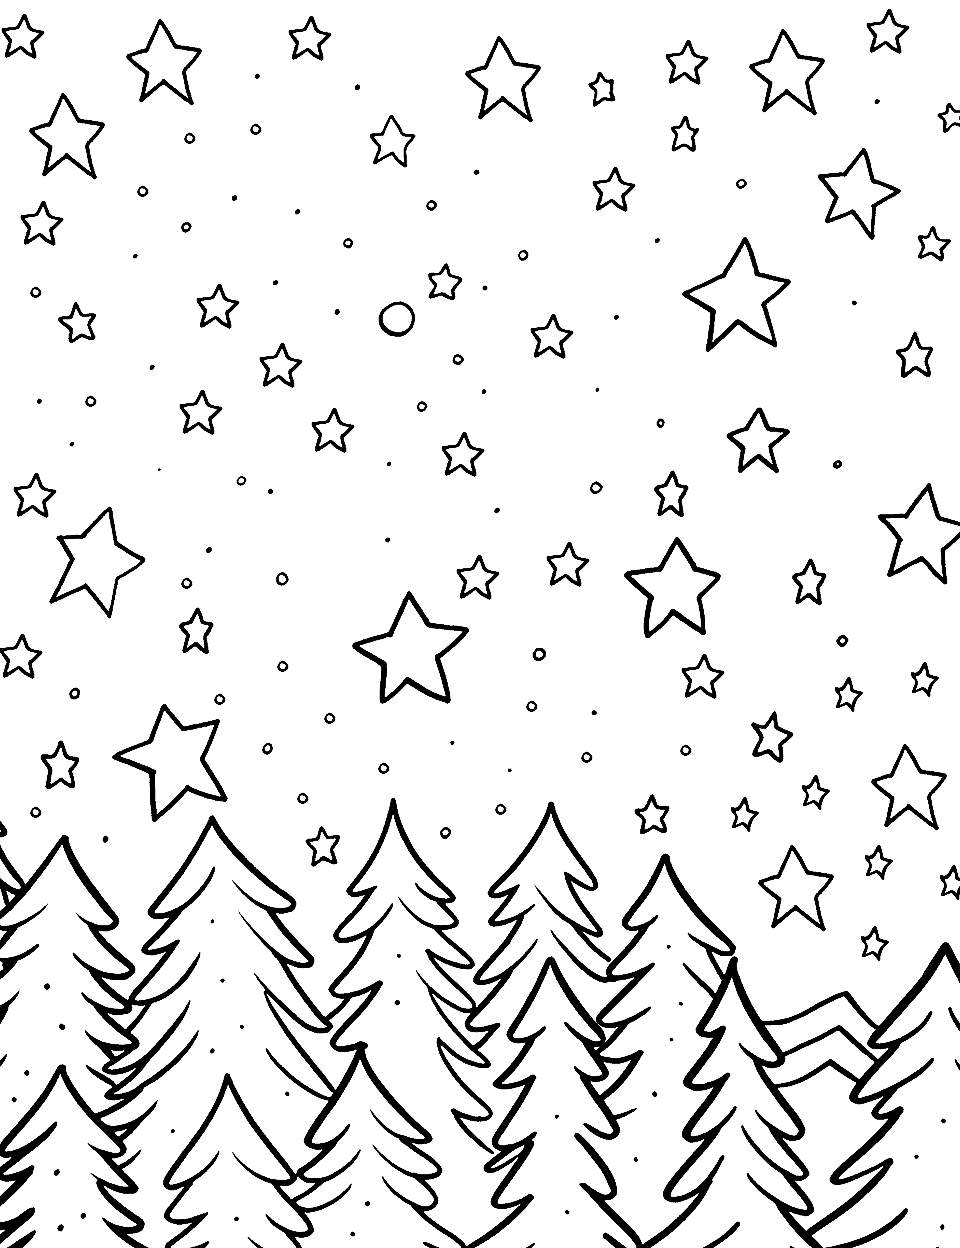 Night Sky Spectacle Star Coloring Page - A landscape showing a night sky filled with stars over a peaceful forest.